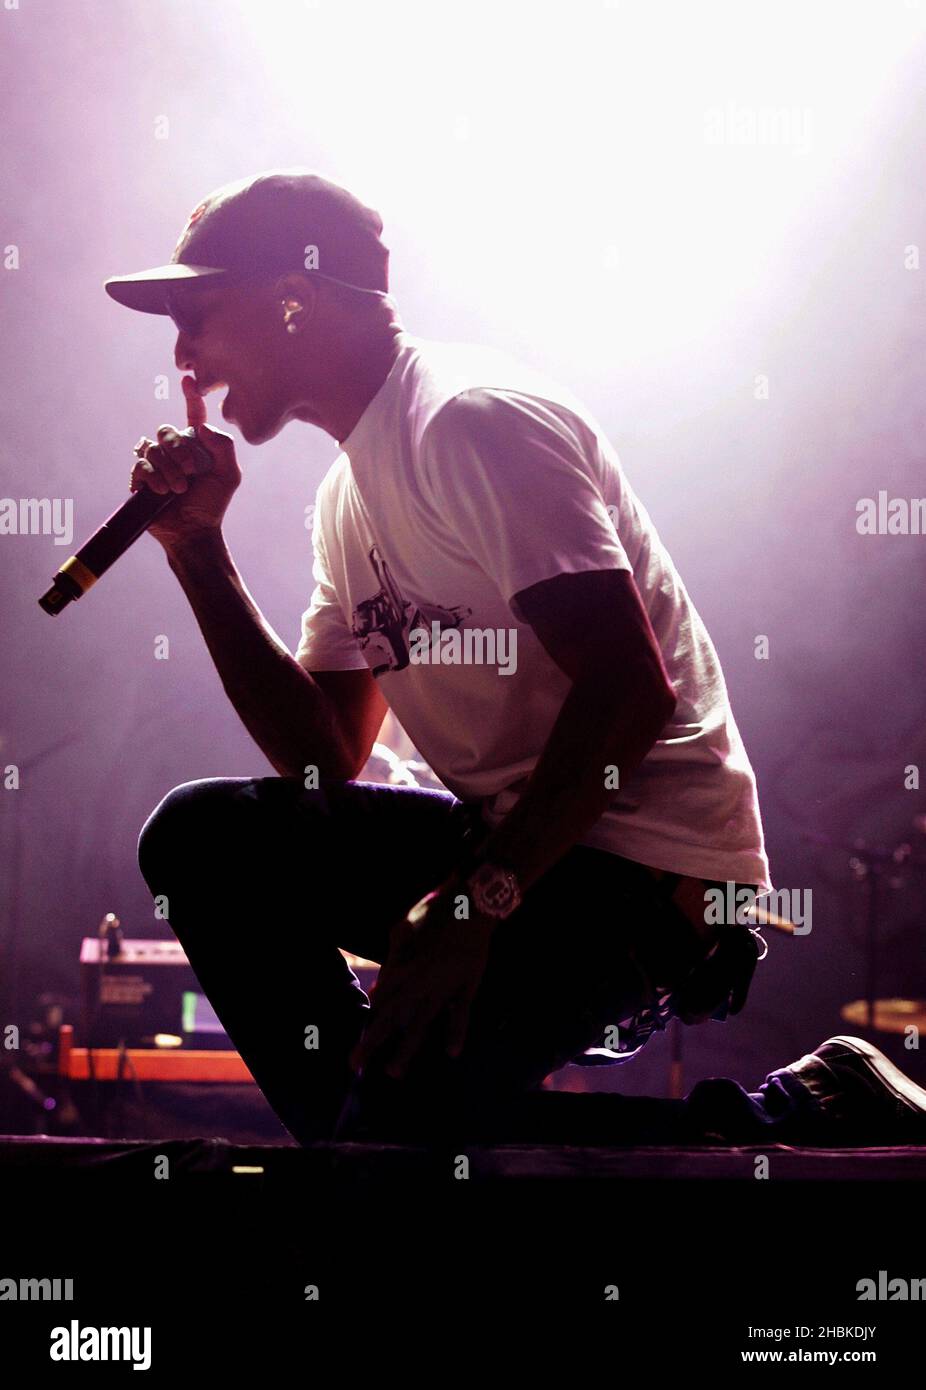 Pharell Williams of N.E.R.D performs live on stage at the Isle of Wight Festival. Stock Photo